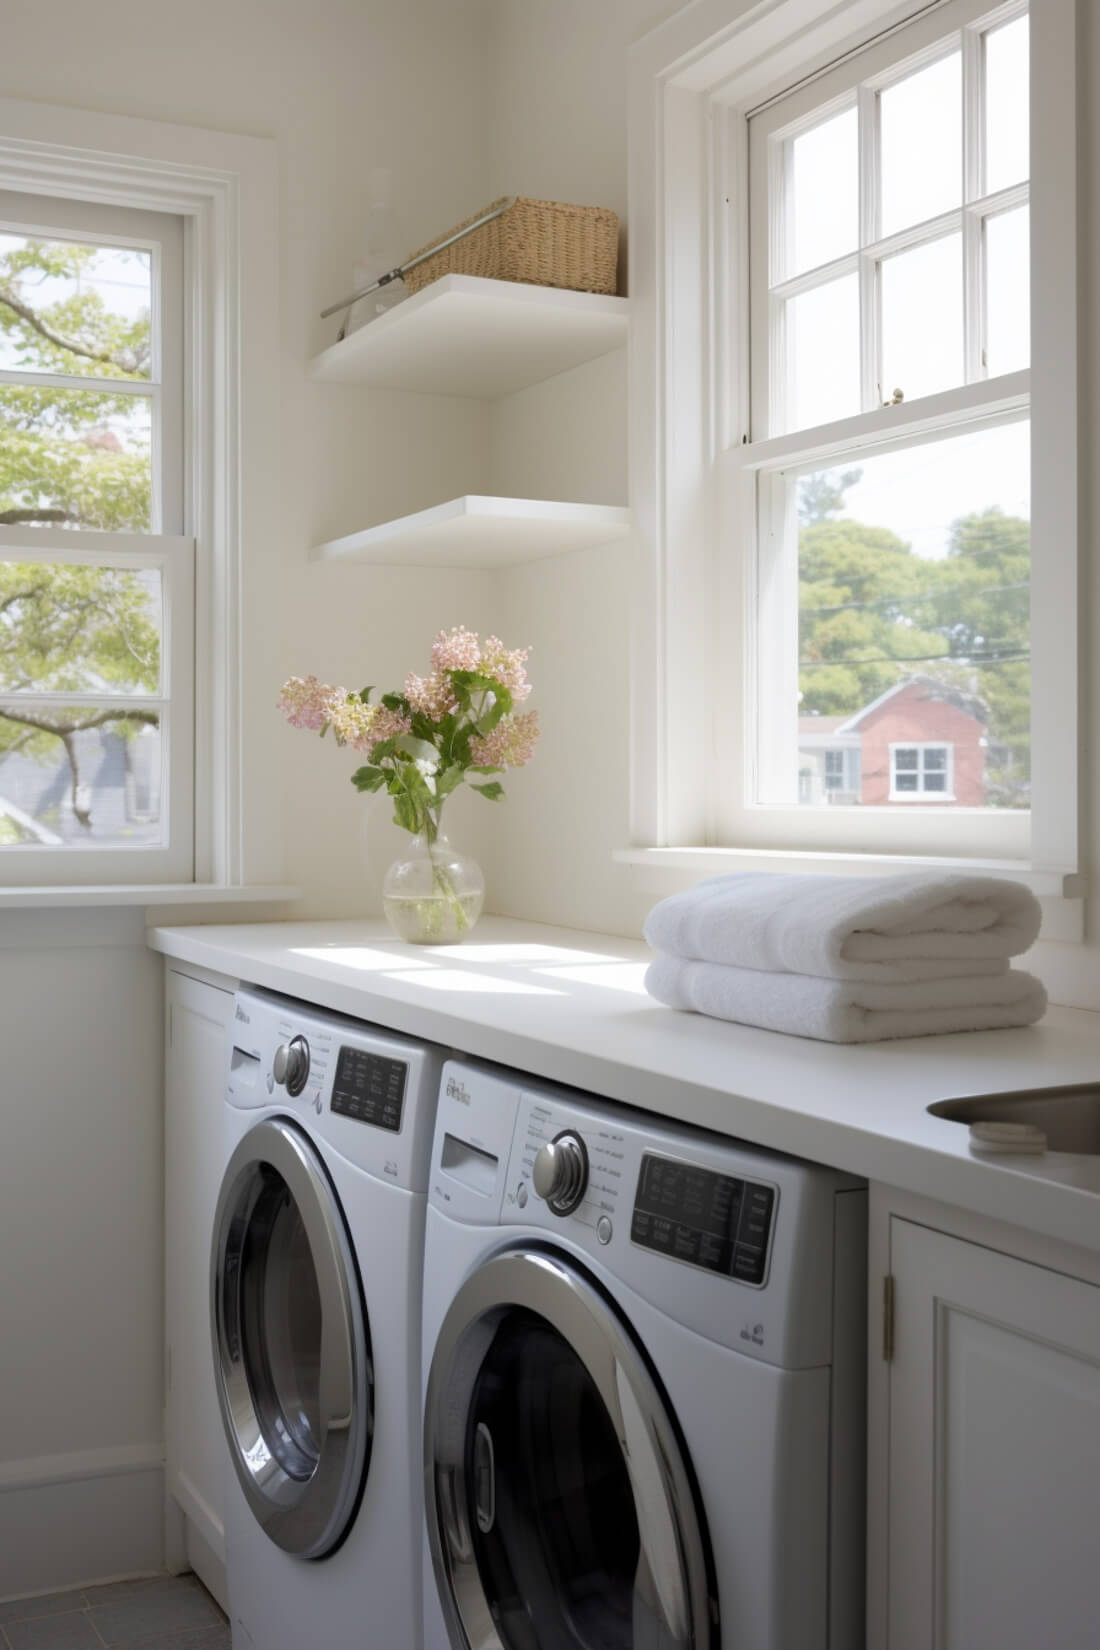 simple white shelves in corner of laundry room above white washer and dryer and white countertop